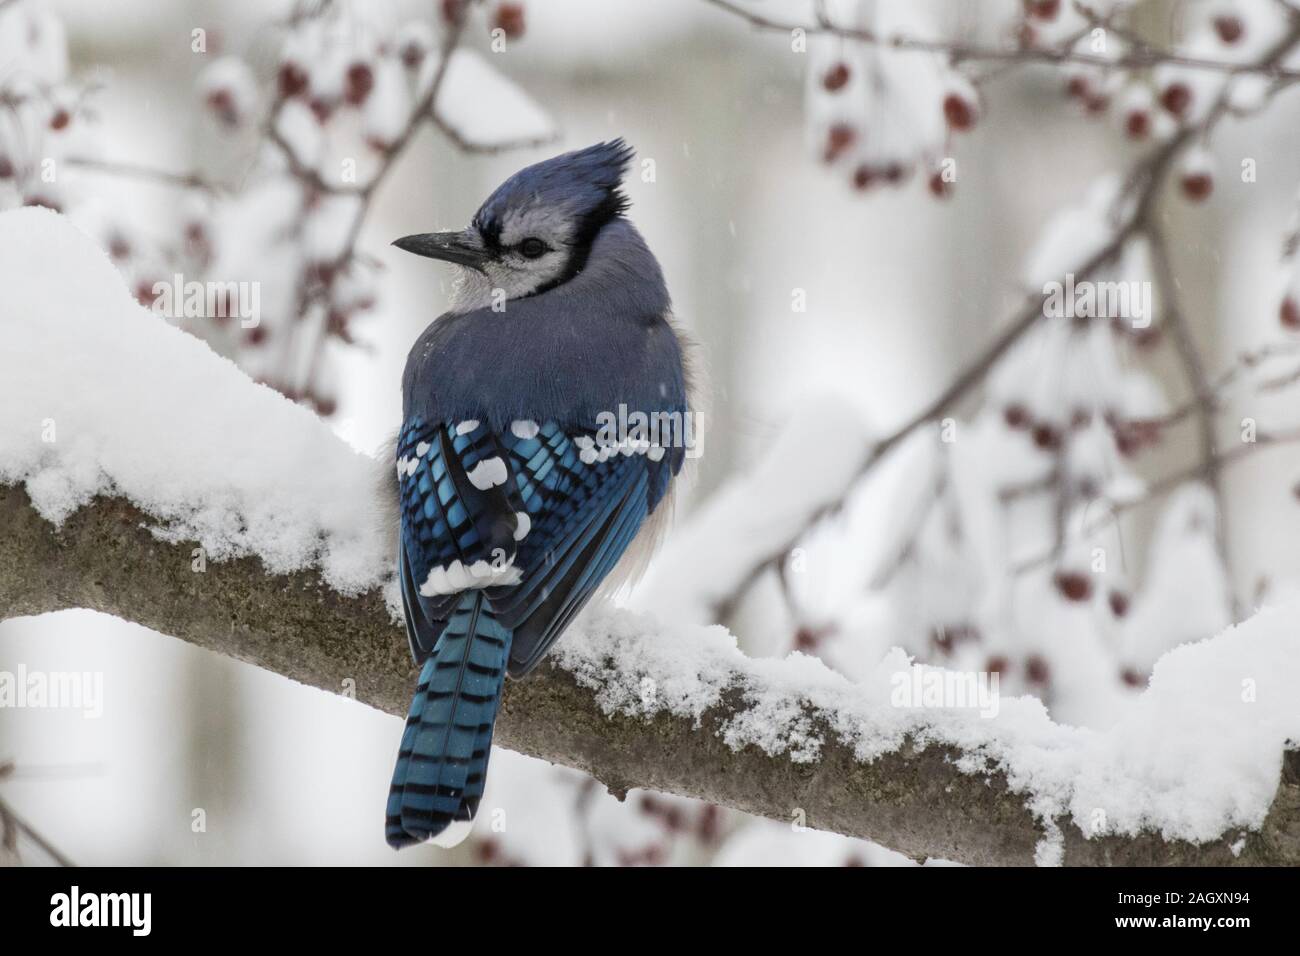 A blue jay sitting on a snow covered branch Stock Photo